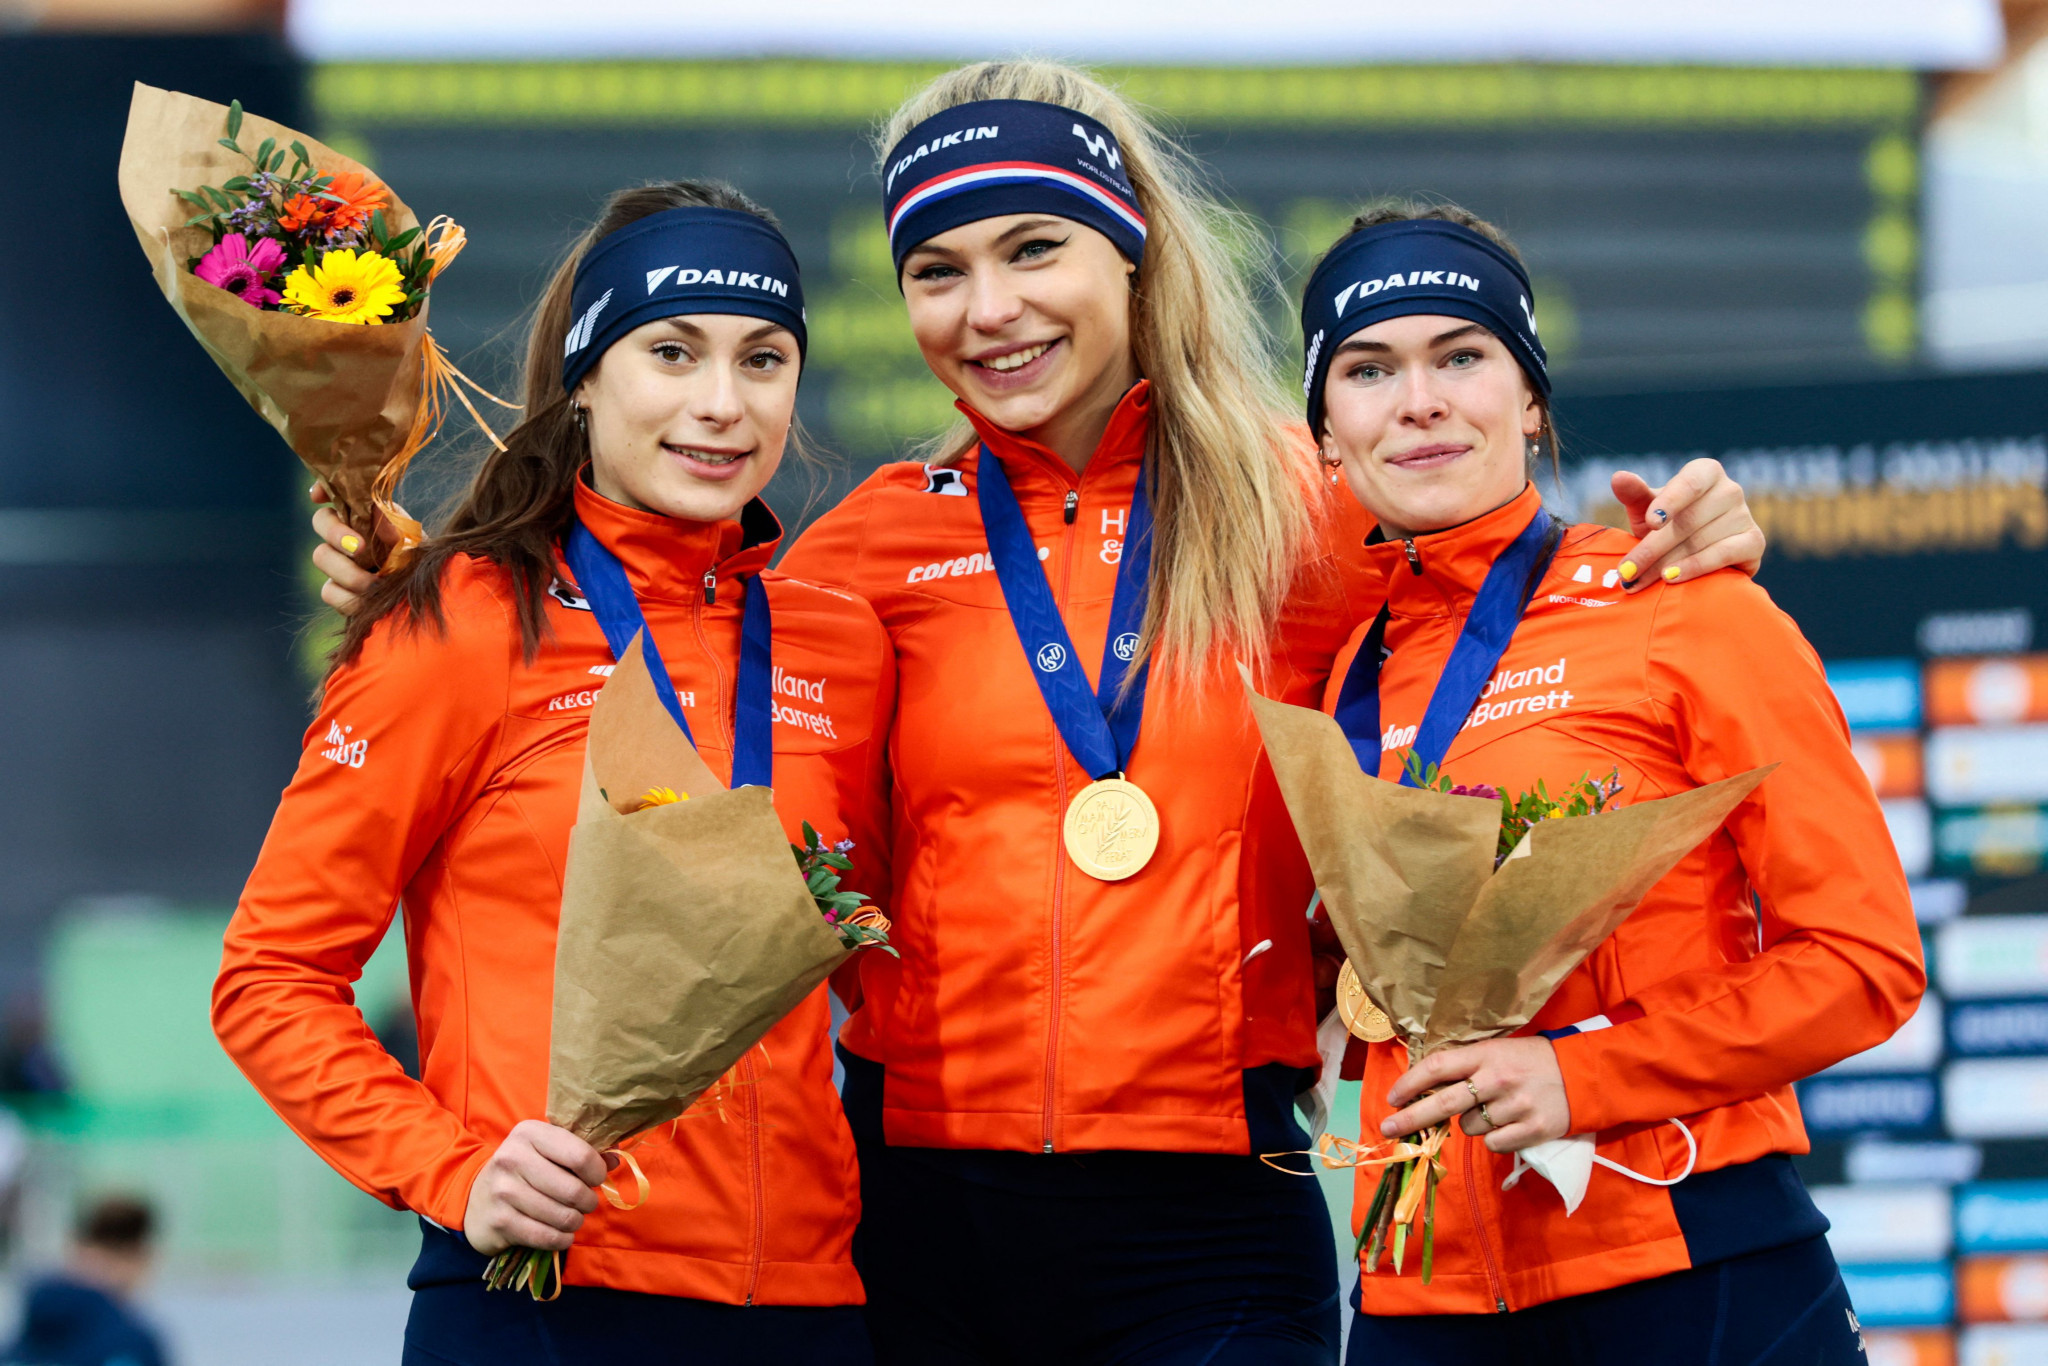 The Netherlands won the women's team sprint title in Hamar ©Getty Images